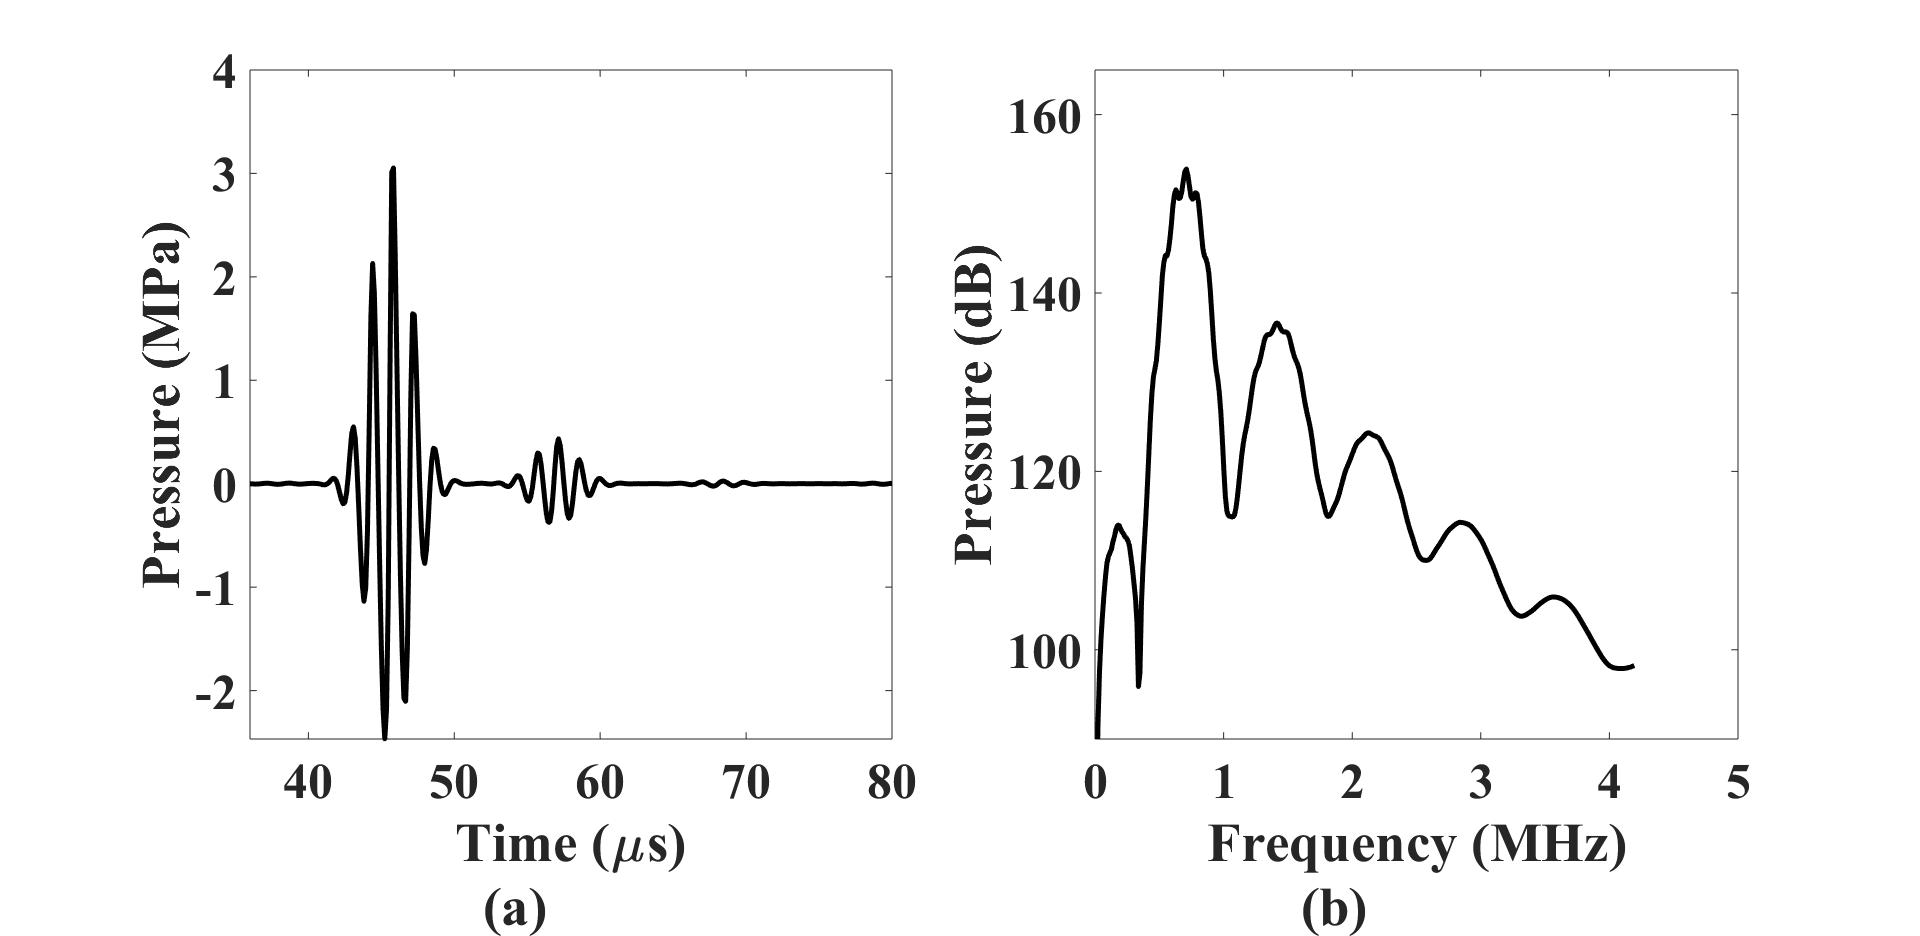 (a) time-domain and (b) frequency-domain signal at the transducer focus